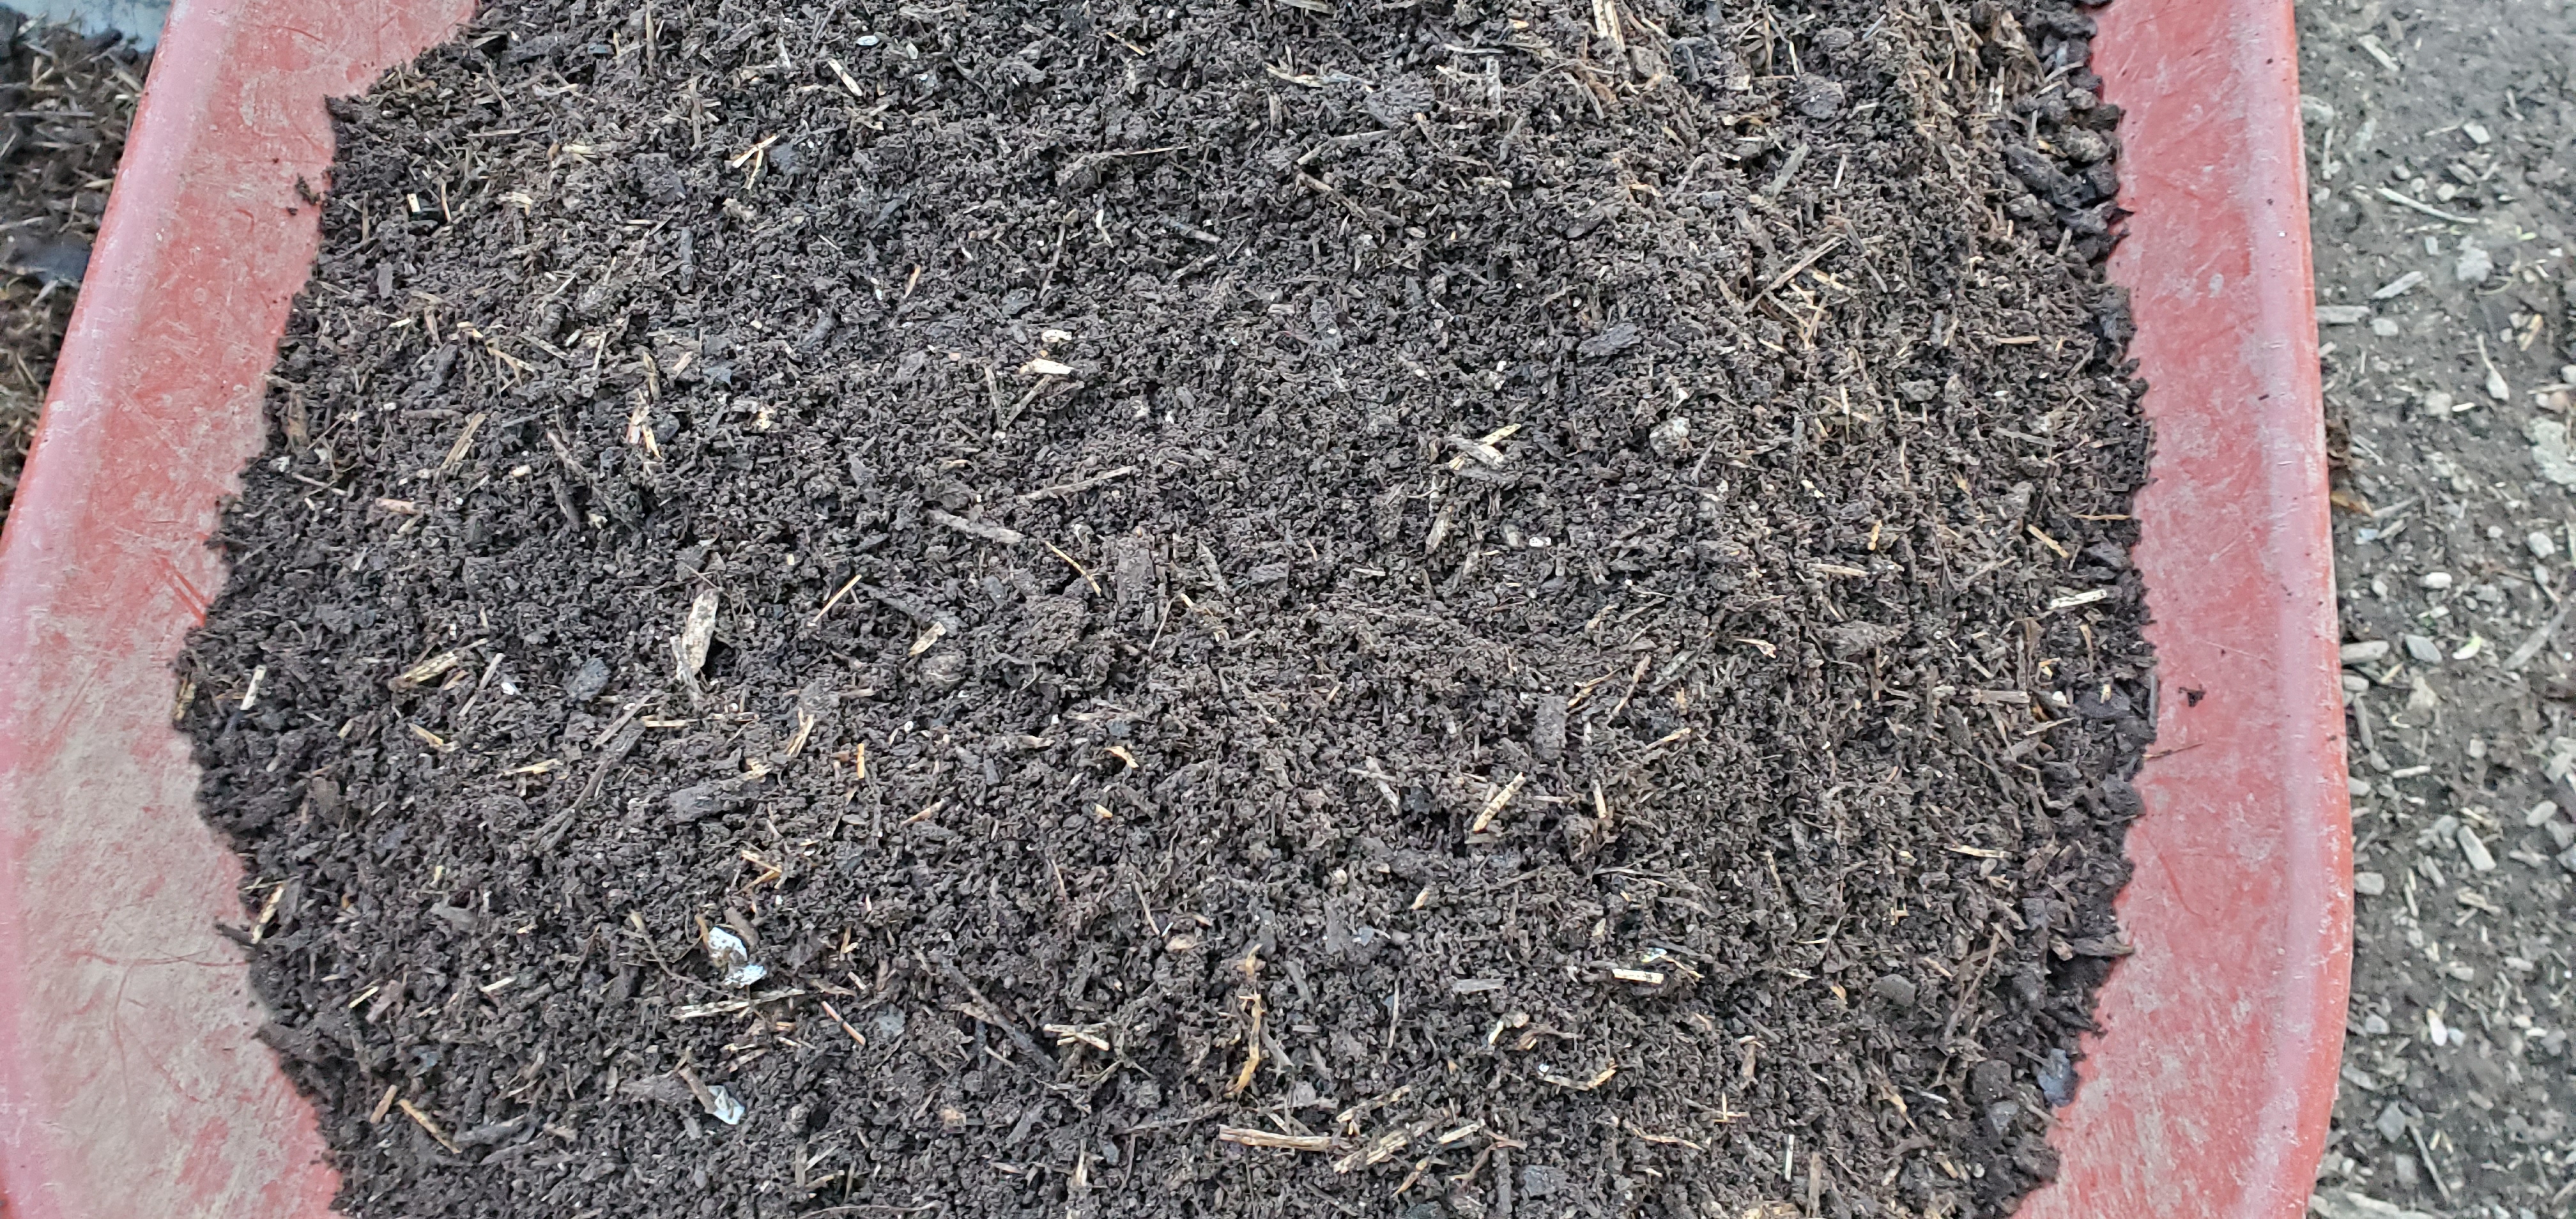 The finest compost soil